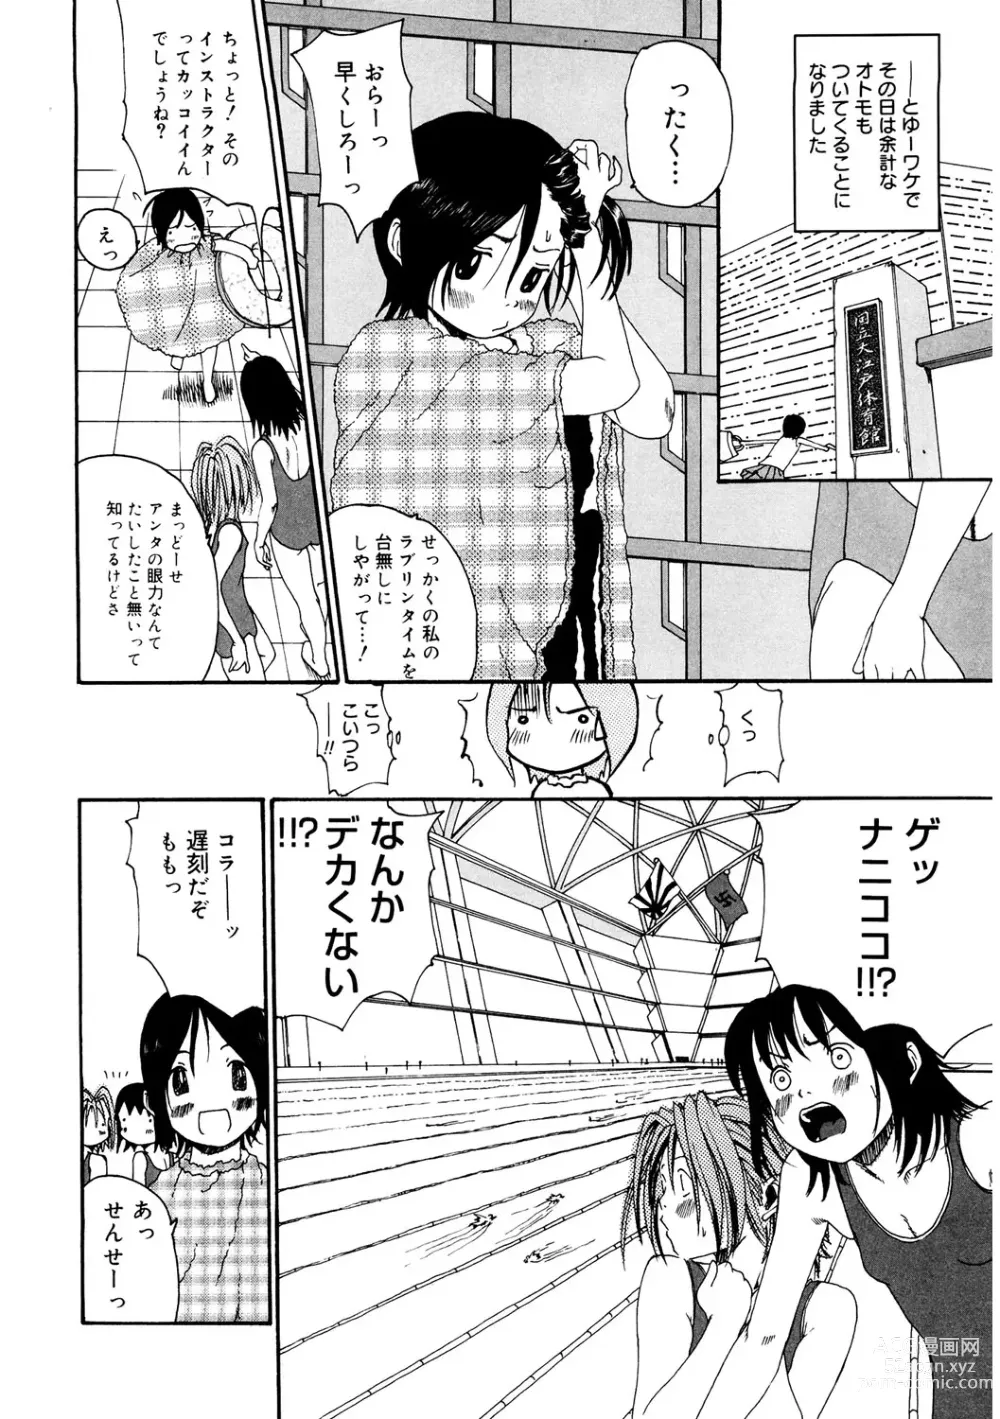 Page 184 of manga LQ -Little Queen- Vol. 52